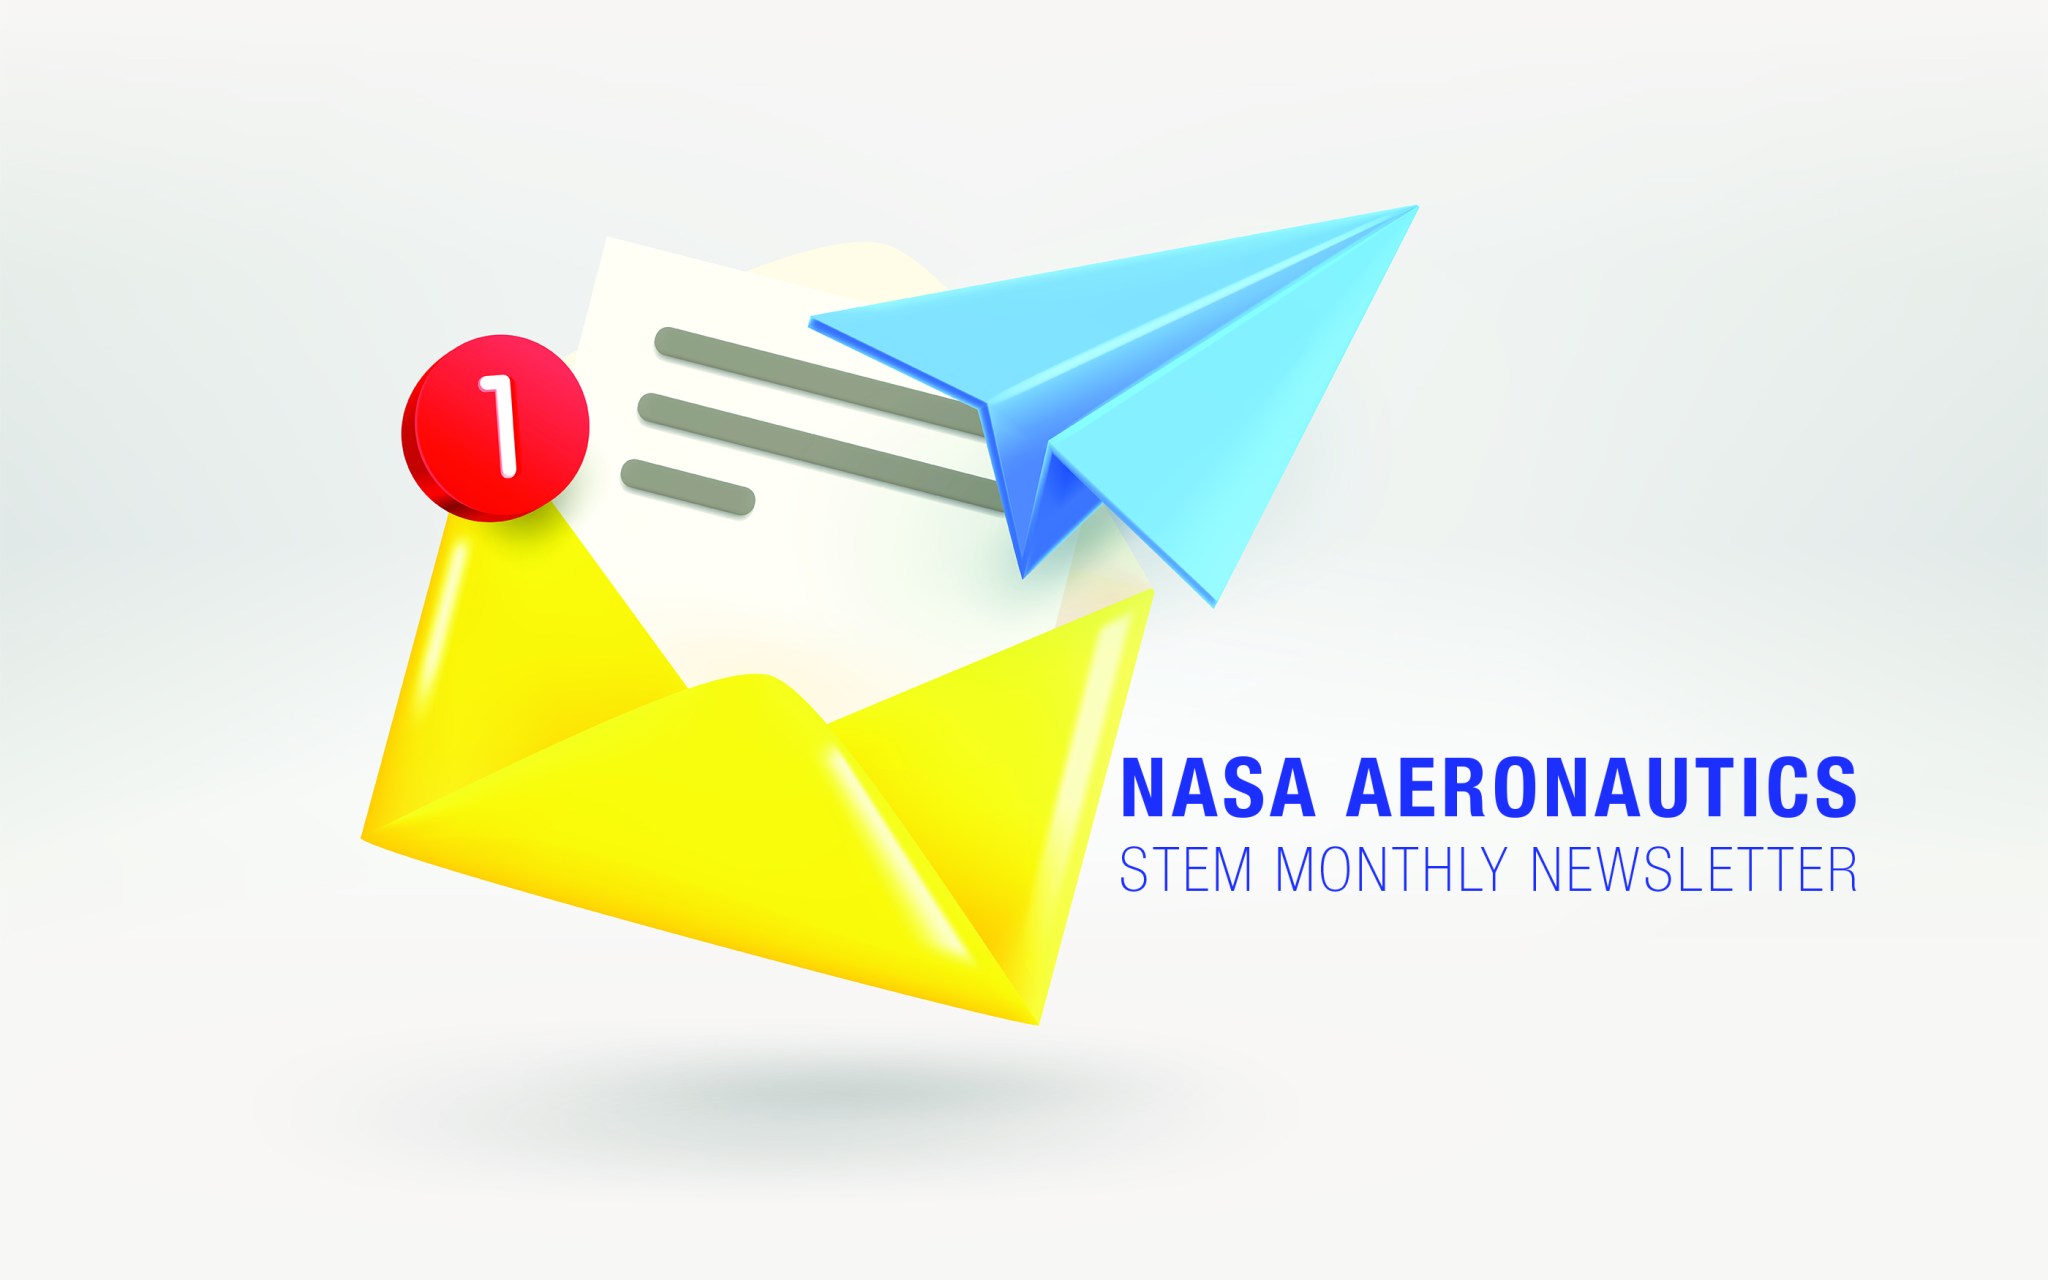 NASA Aeronautics STEM Monthly Newsletter graphic showing an email icon with a paper airplane.